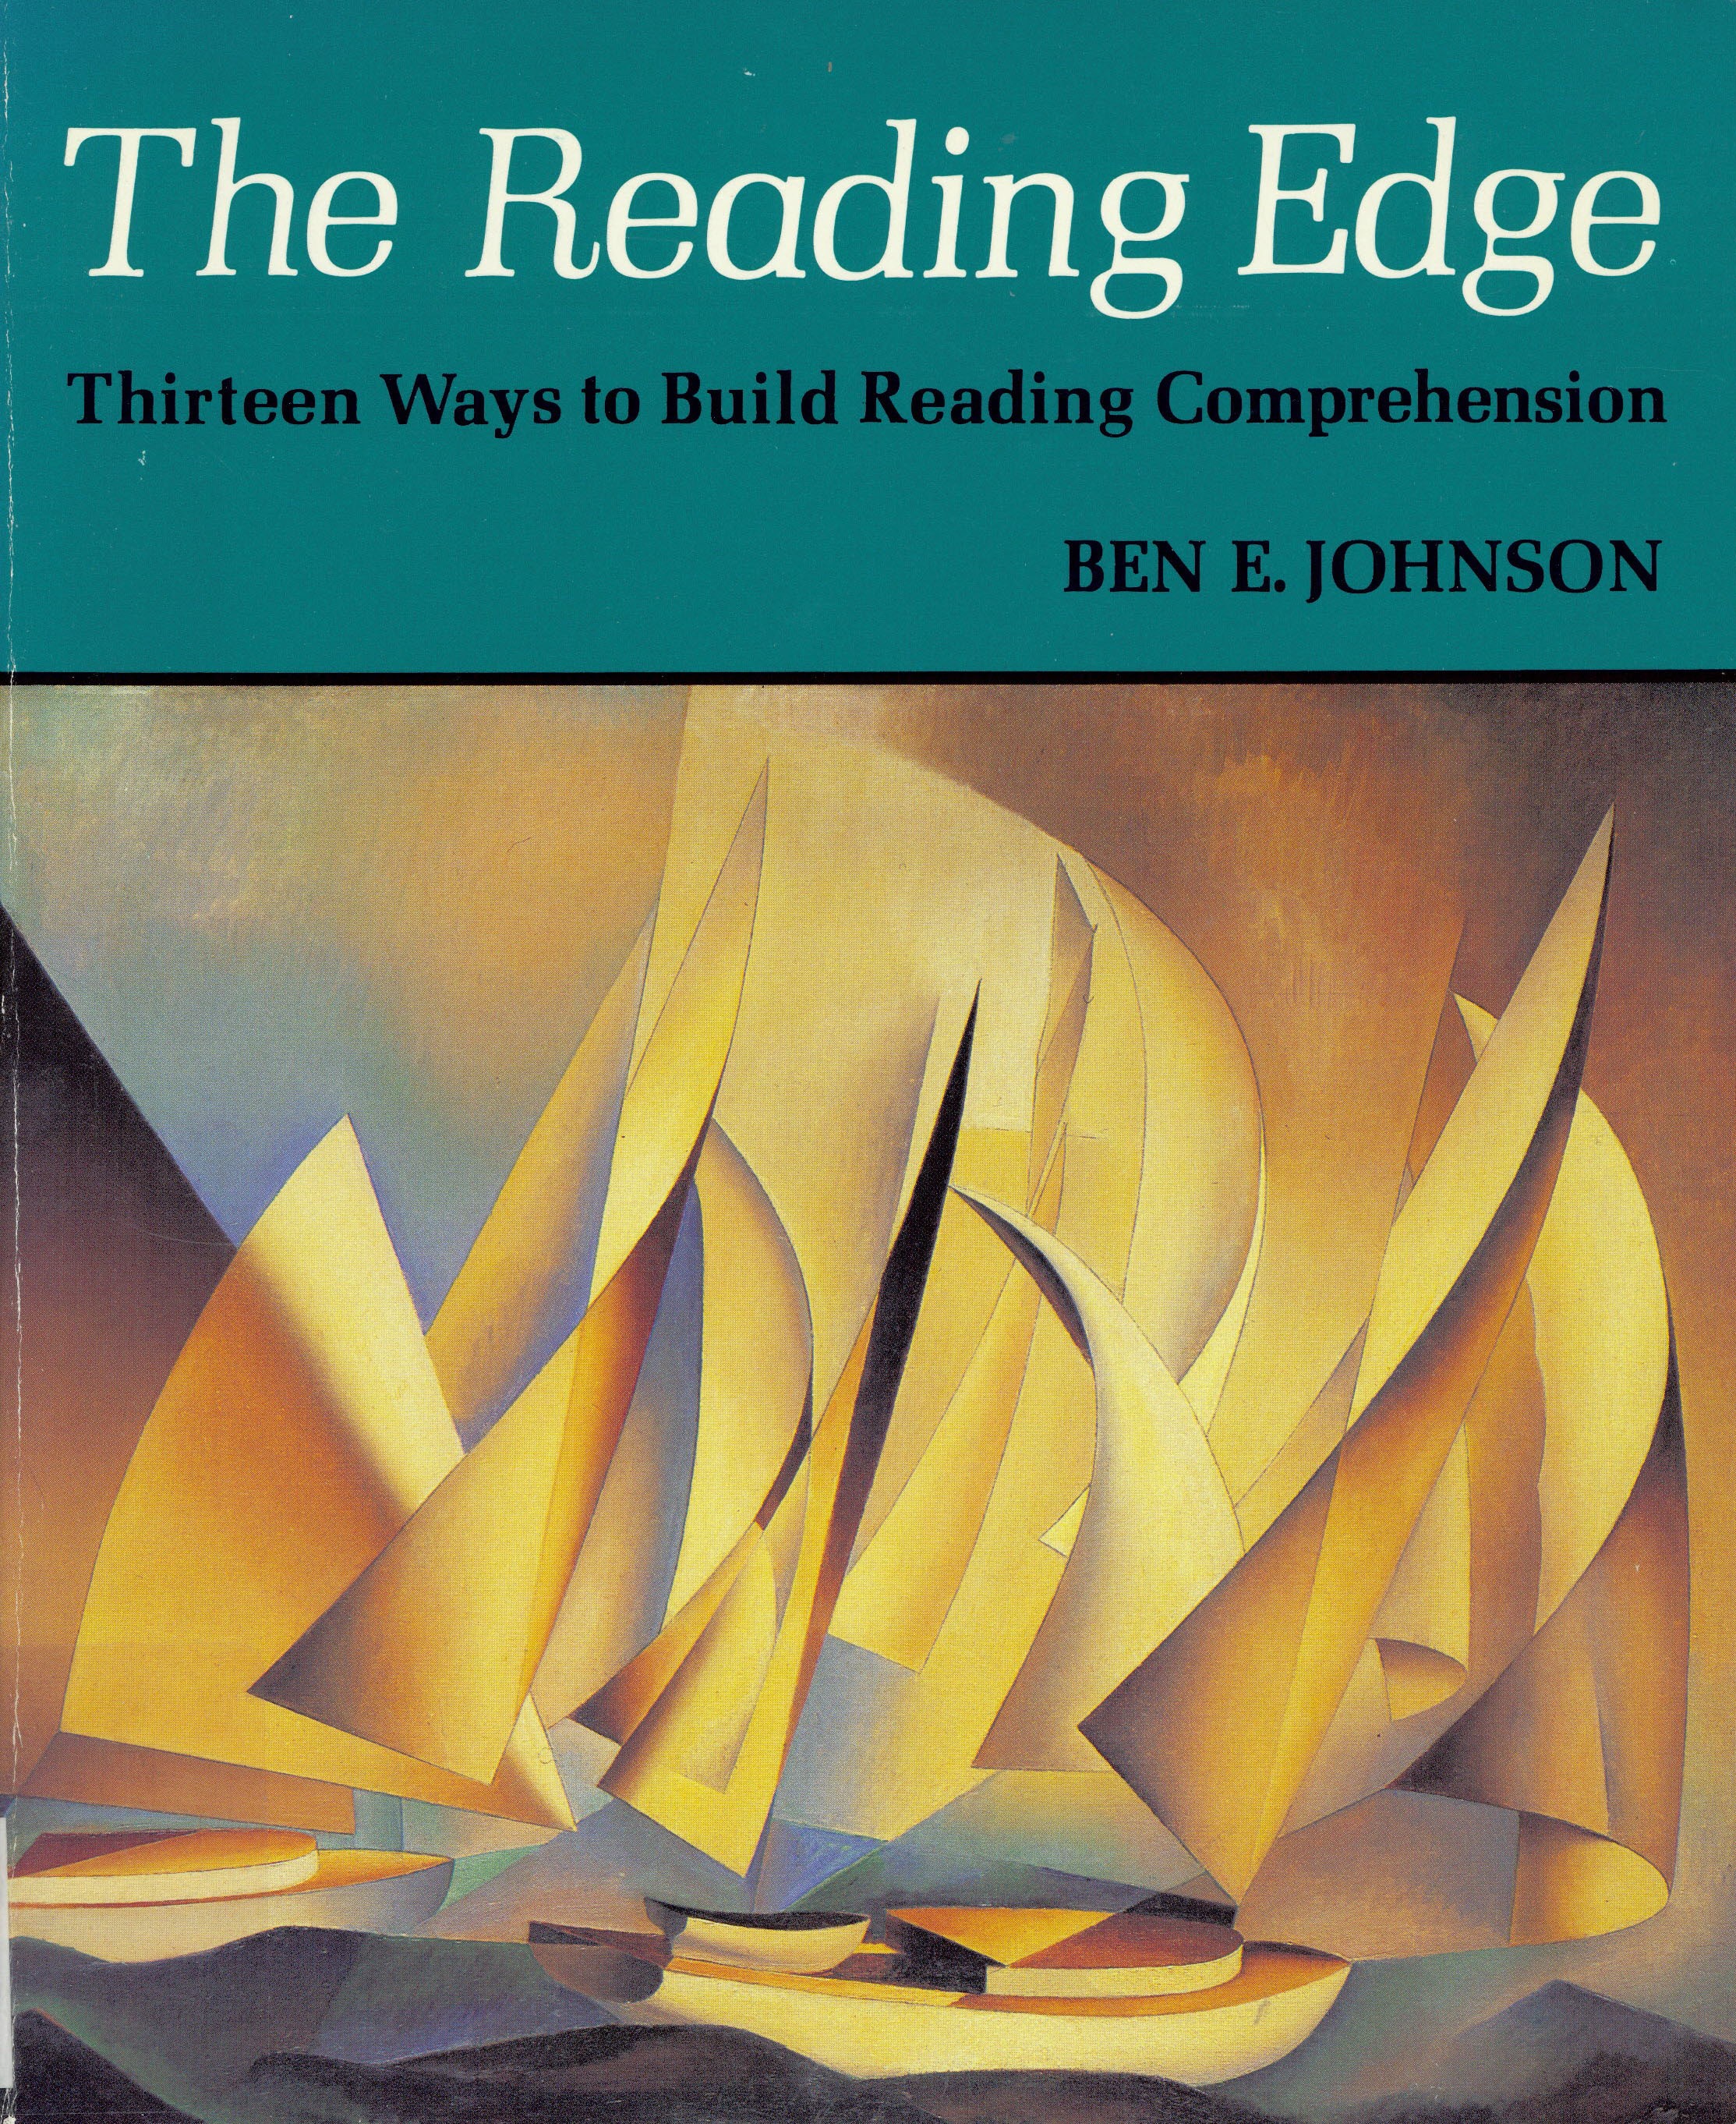 The reading edge : thirteen ways to build reading comprehension